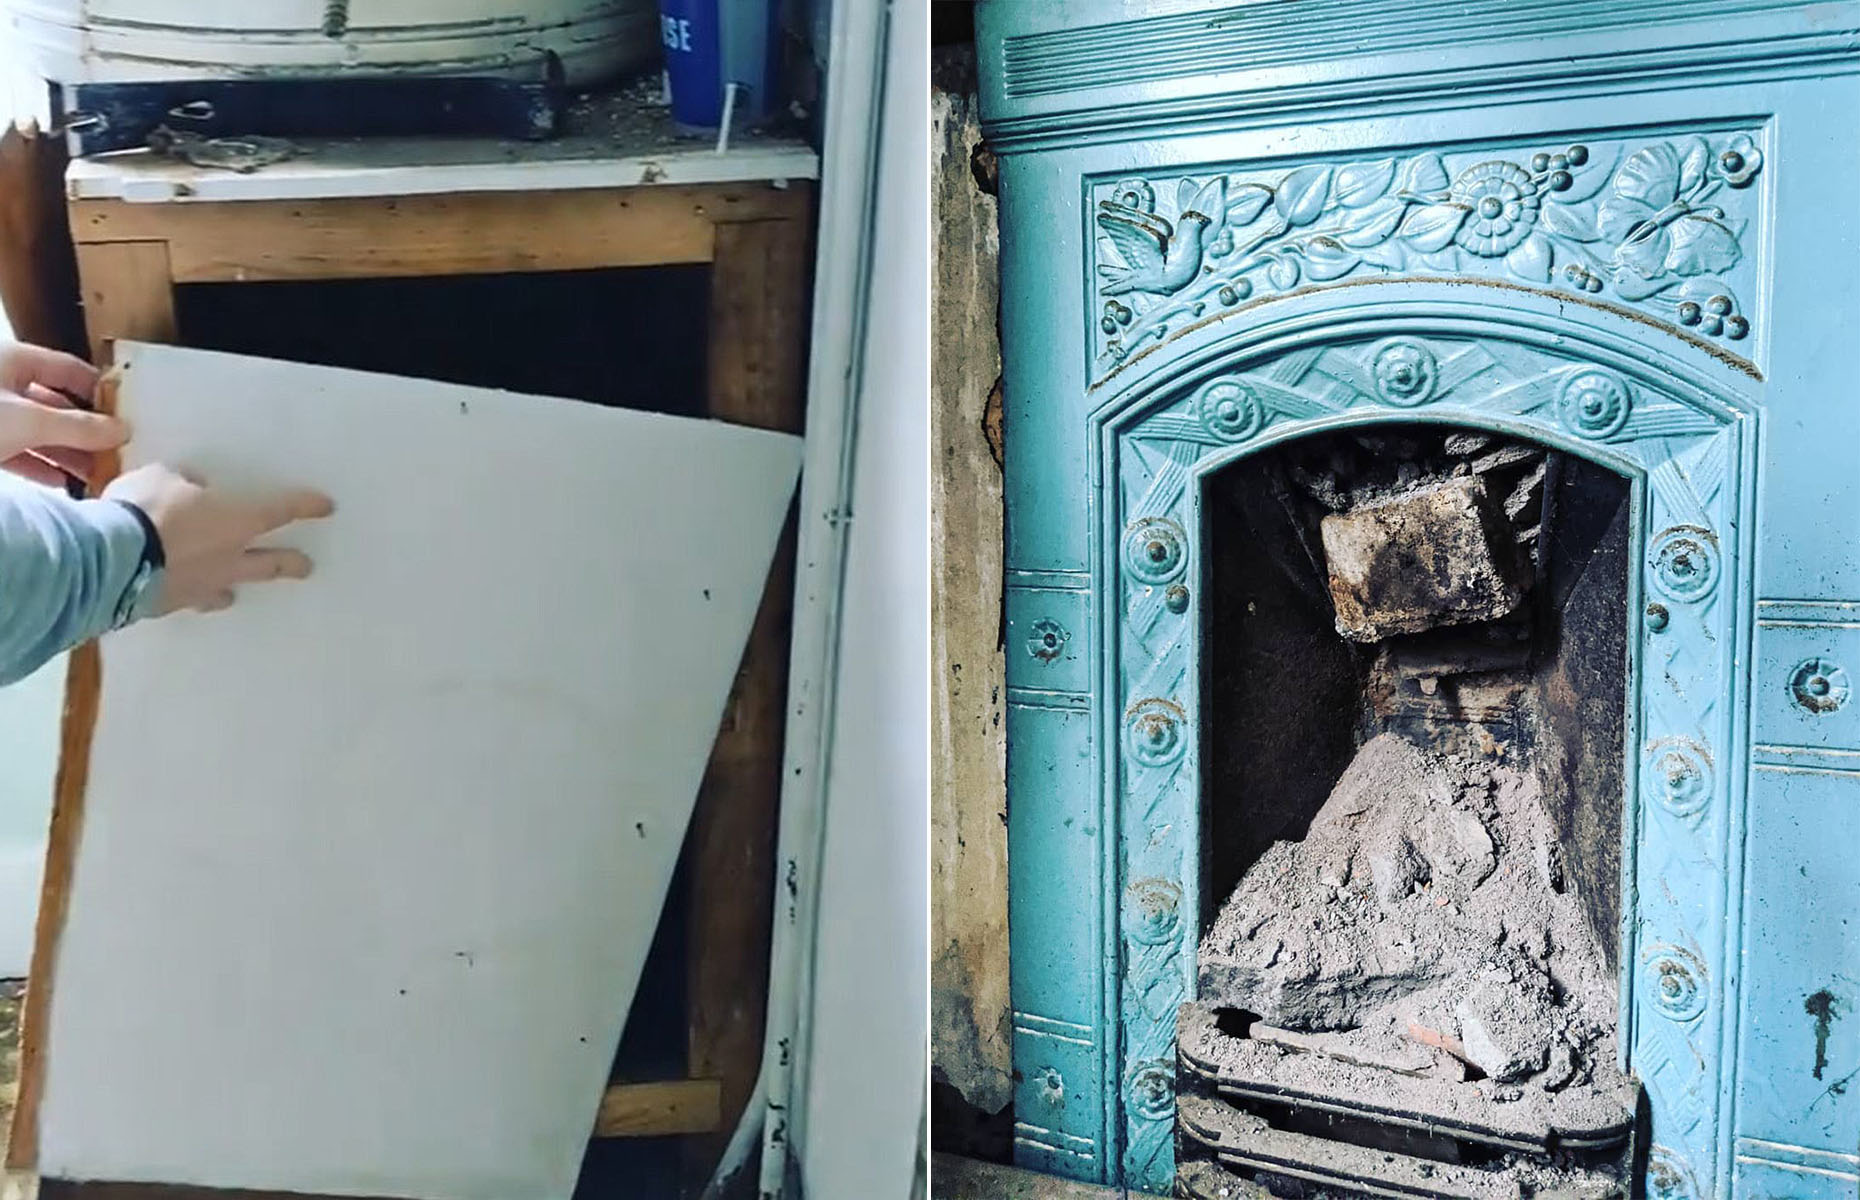 A colourful antique gem was uncovered beneath an old boiler. Image: @its_a_fixer_upper / Instagram